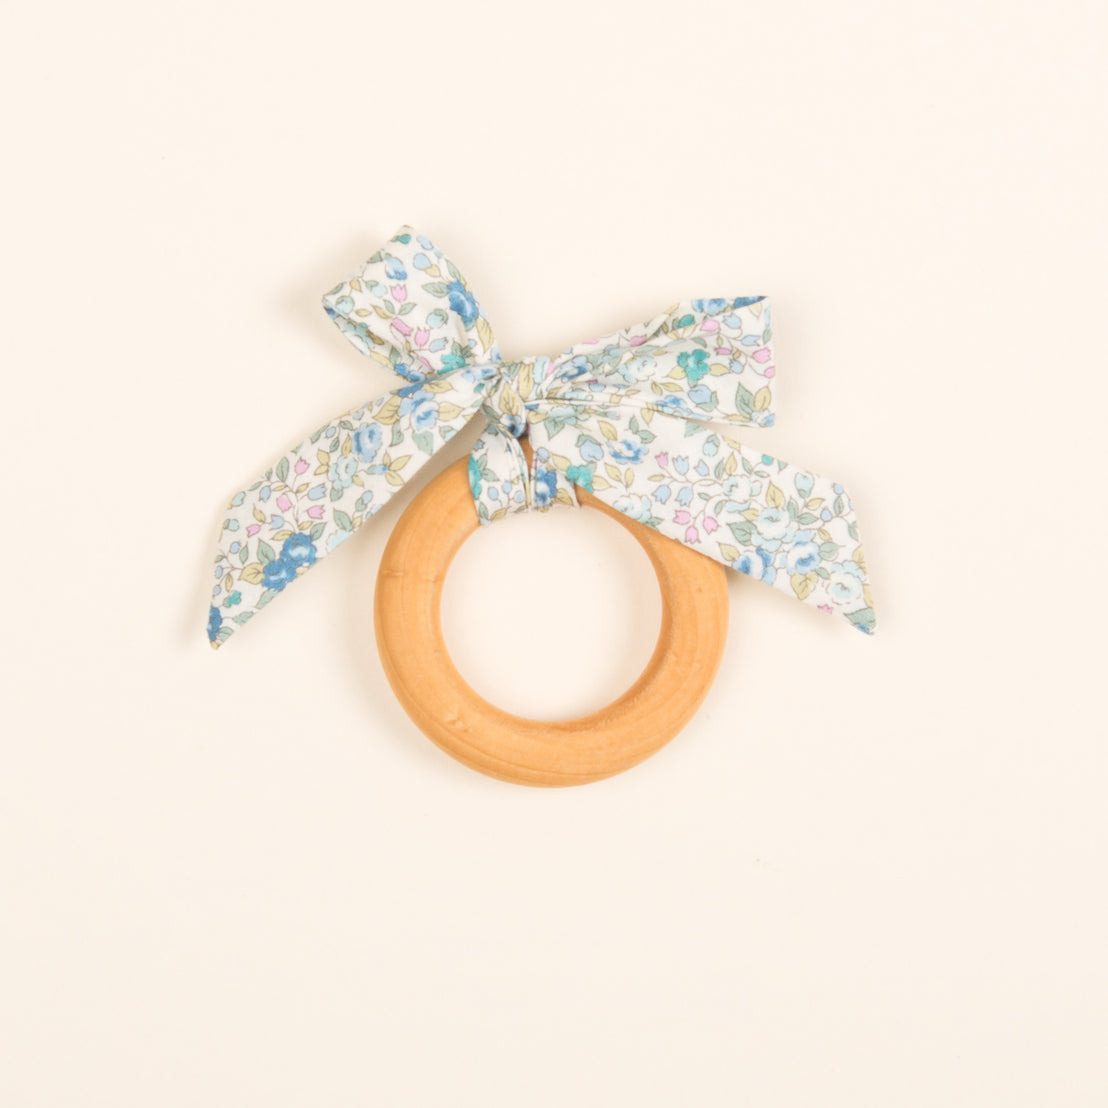 A Petite Fleur Wooden Teether Ring with a delicate floral fabric bow tied around it, presented on a light beige background.